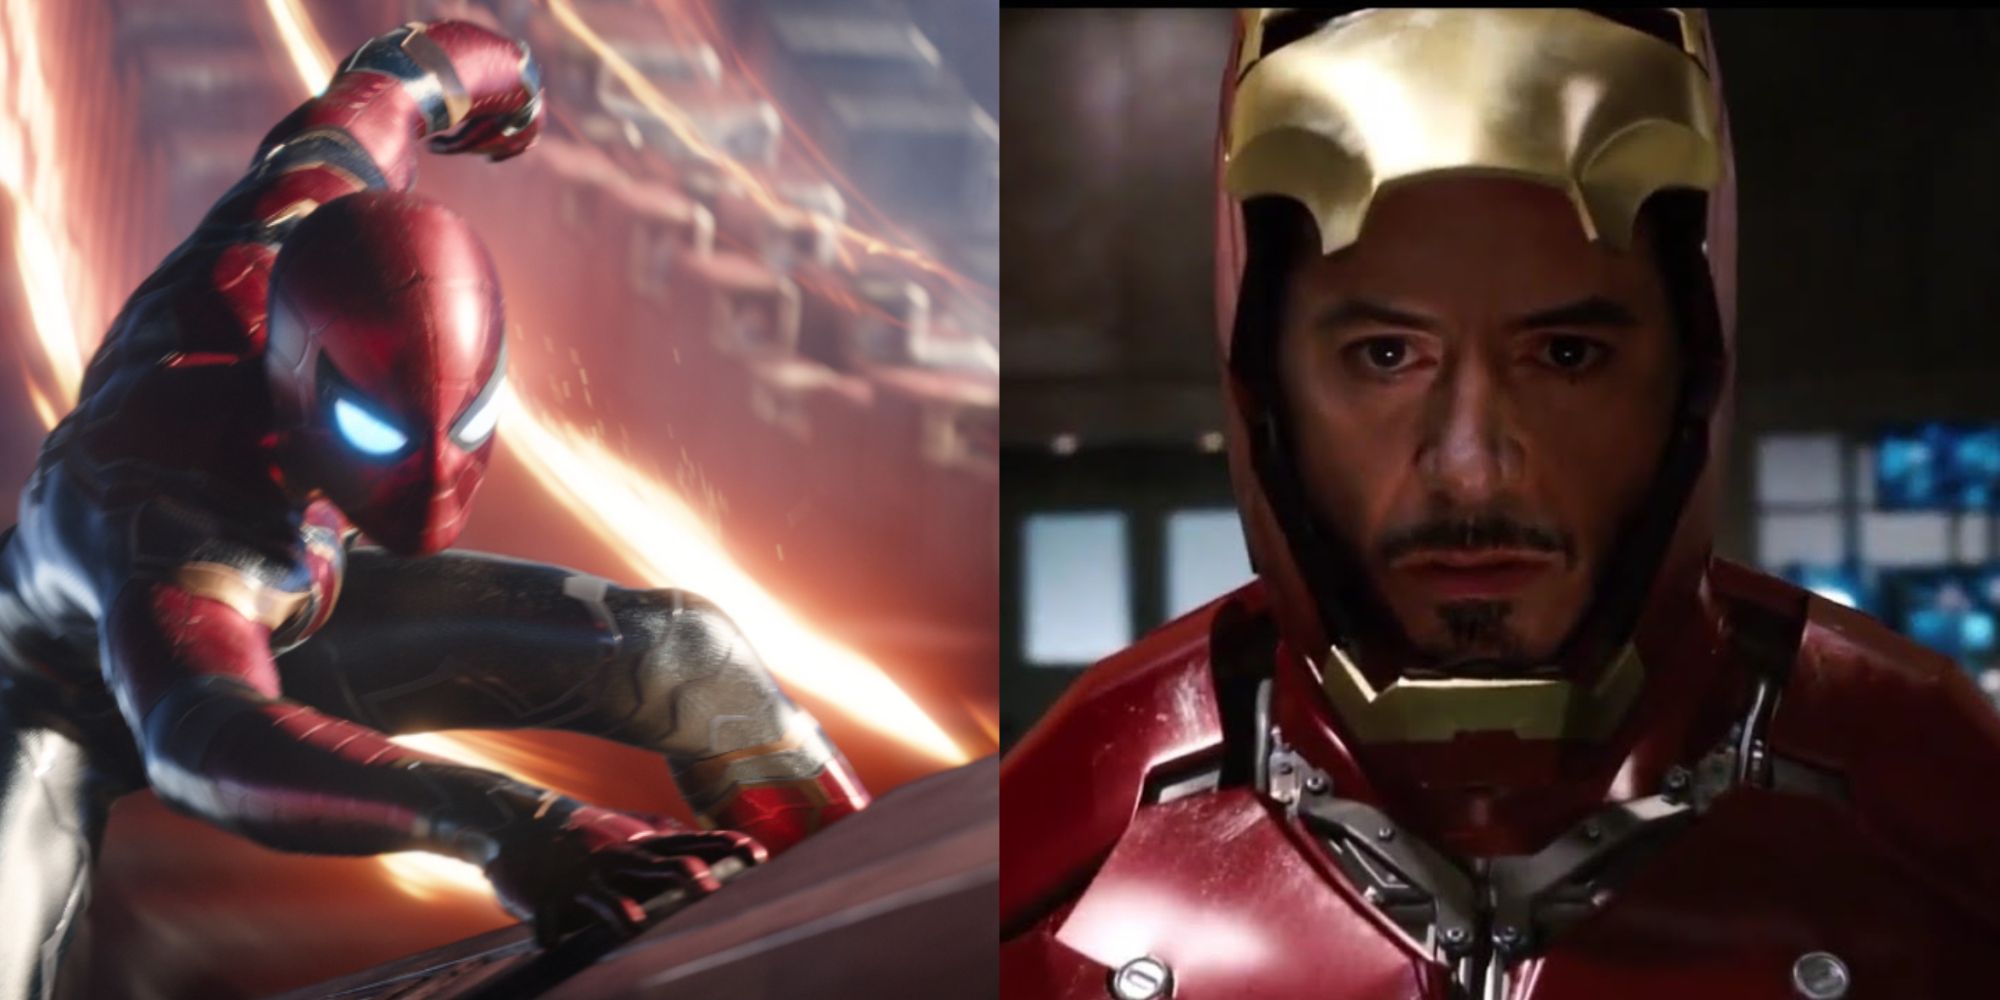 Split images of Spider-Man crouching in Avengers Infinity War and Iron Man putting on the suit